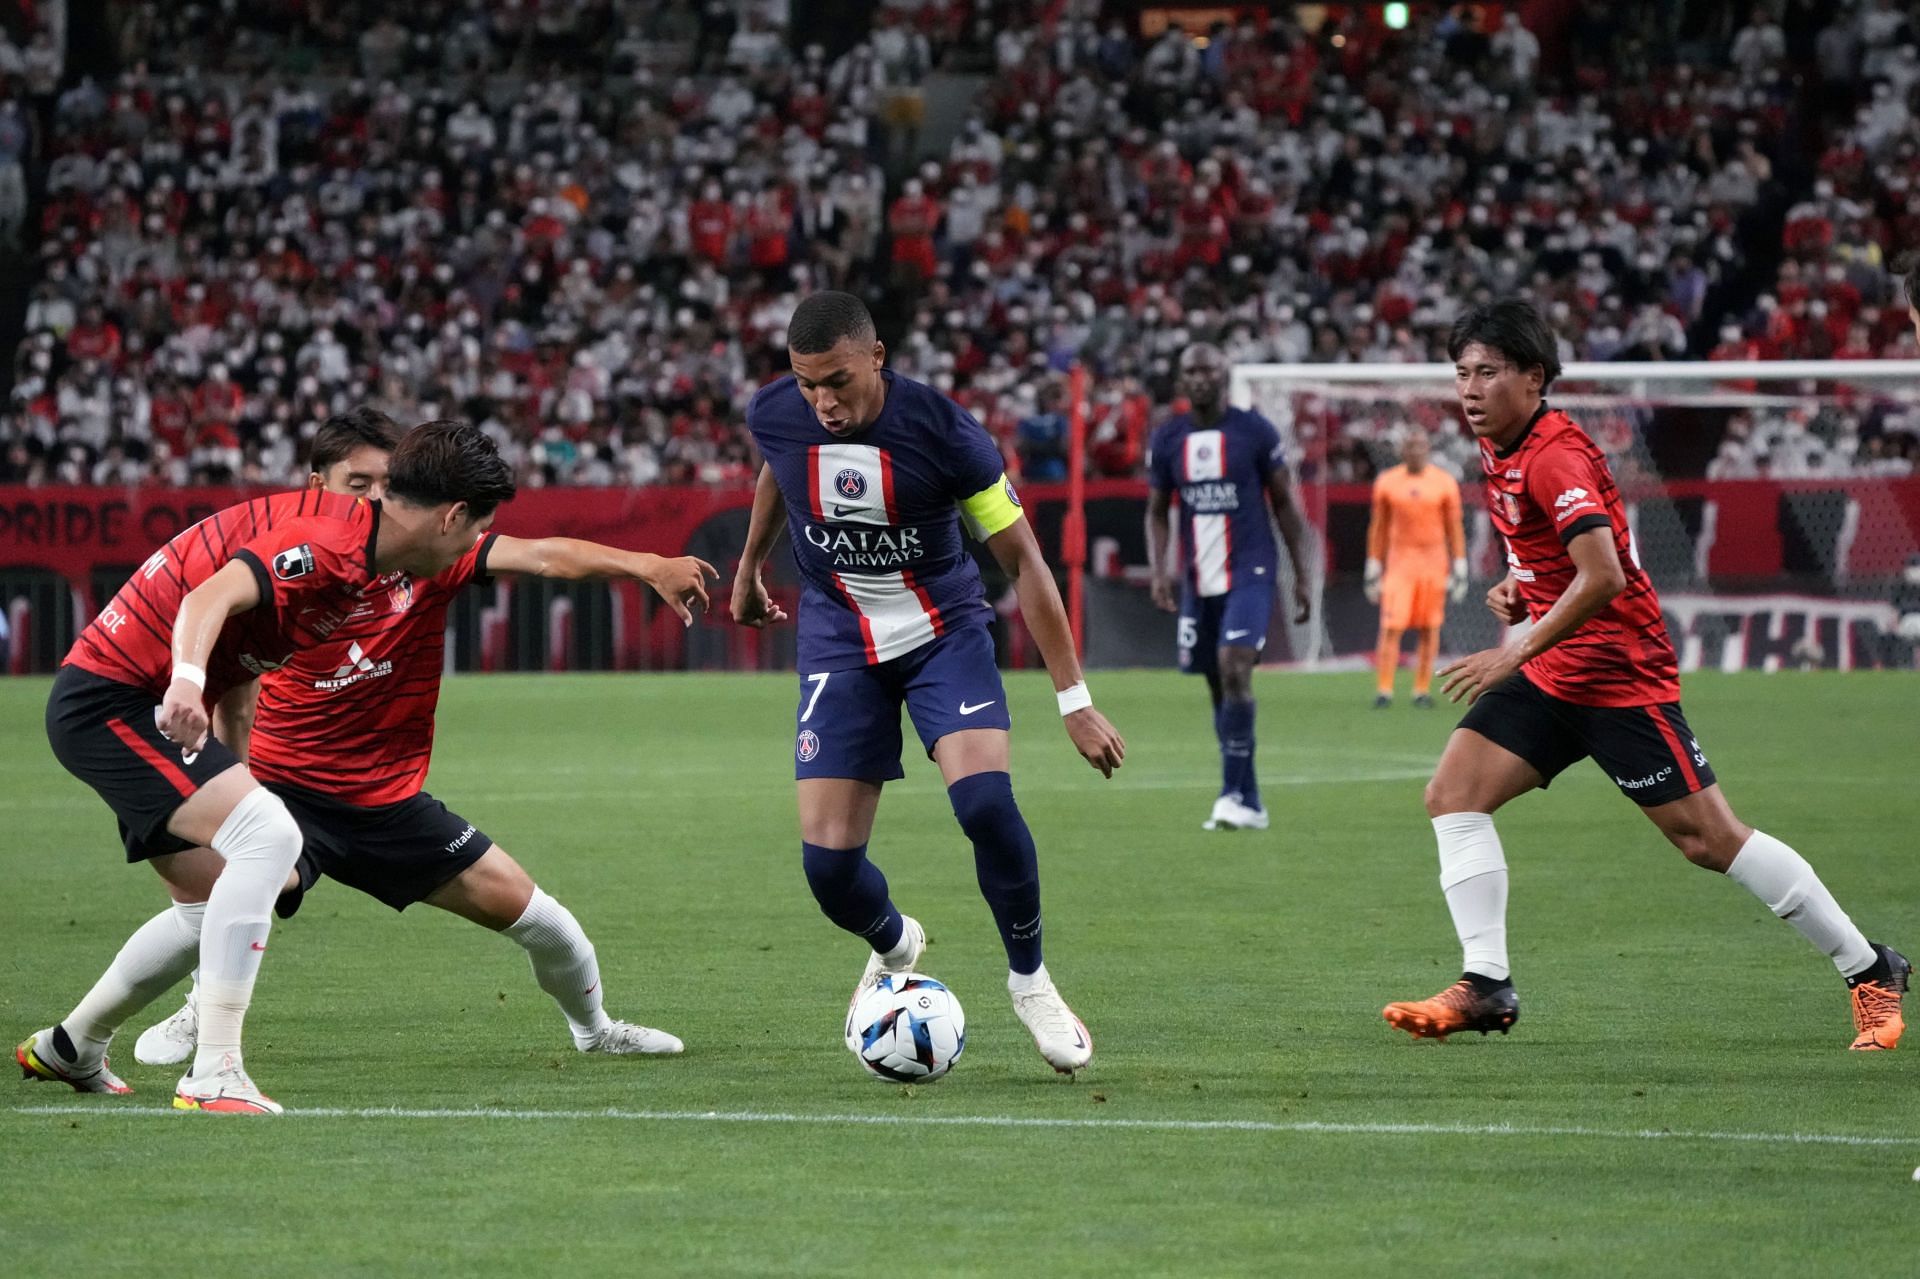 Urawa Reds face Nagoya Grampus in their upcoming J1 League fixture on Saturday